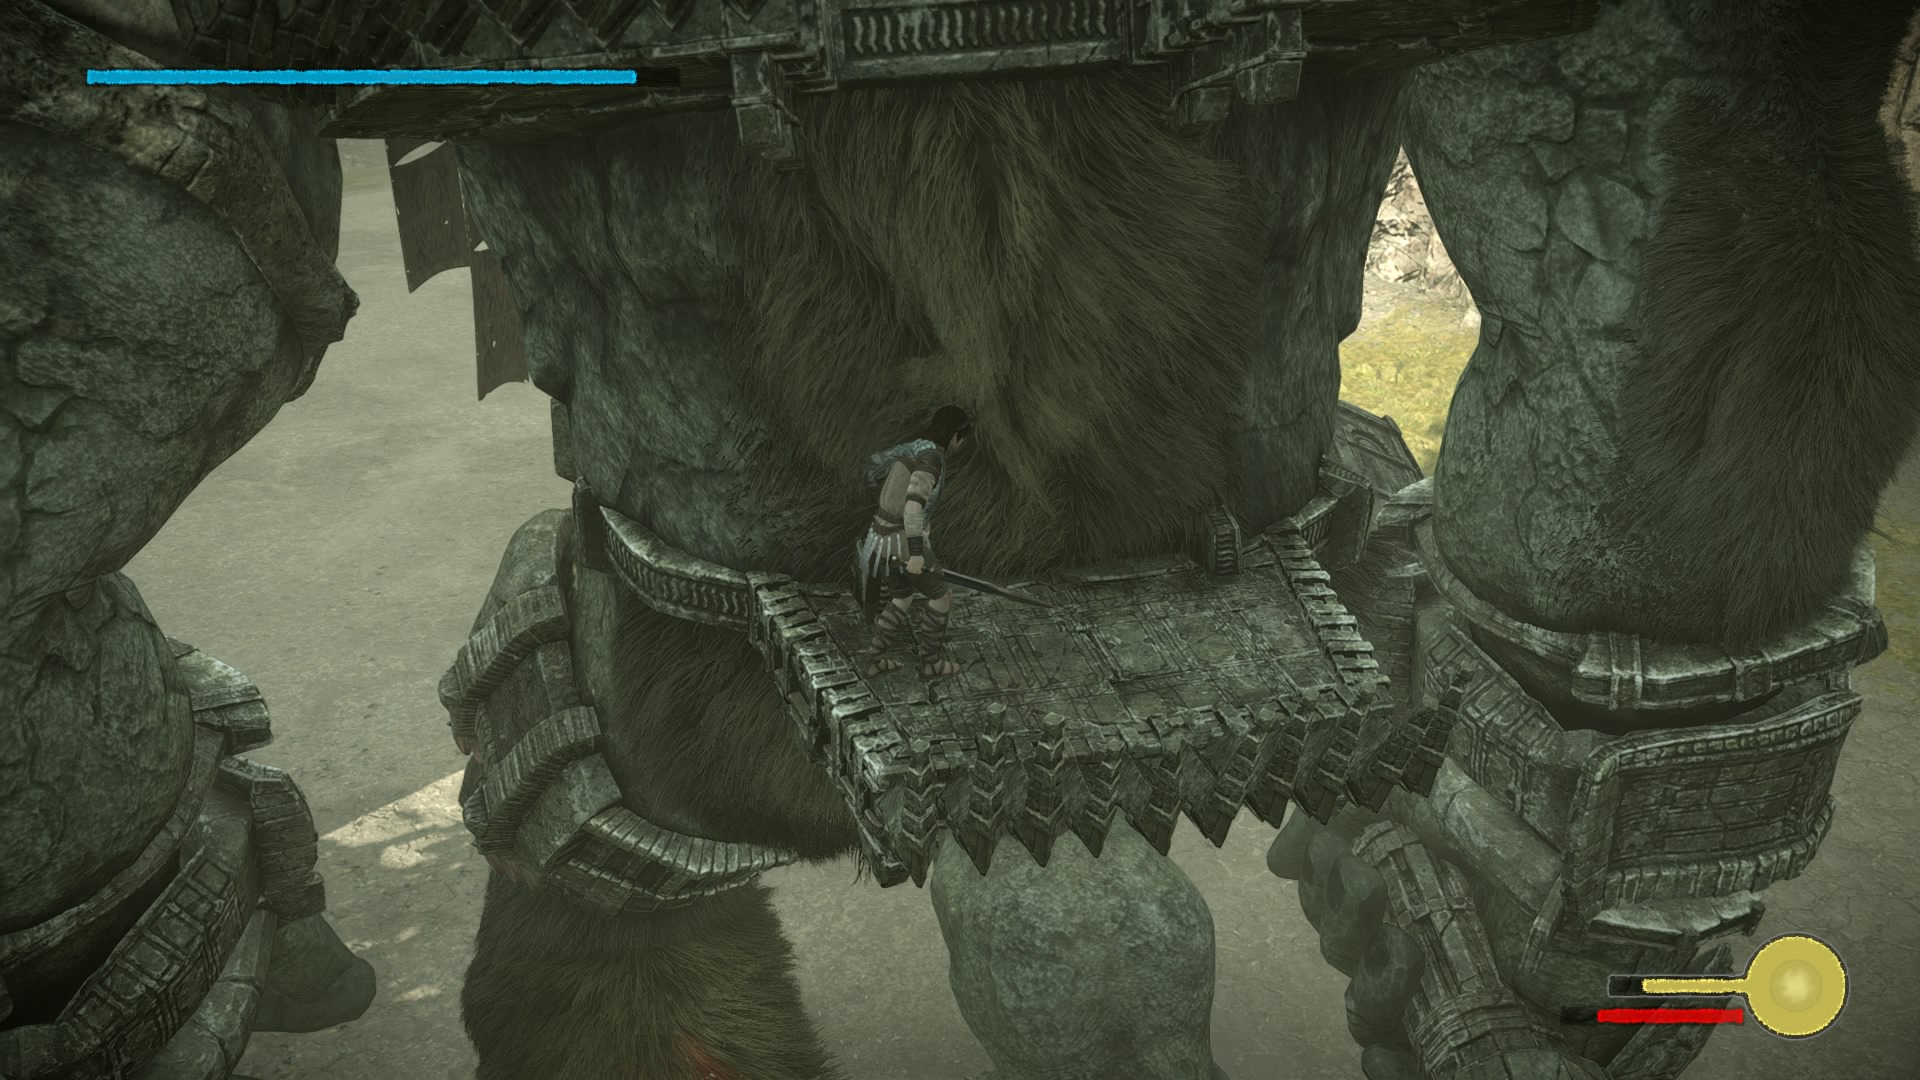 Shadow Of The Colossus: We Defeat The First 5 Bosses On PS4 - GameSpot